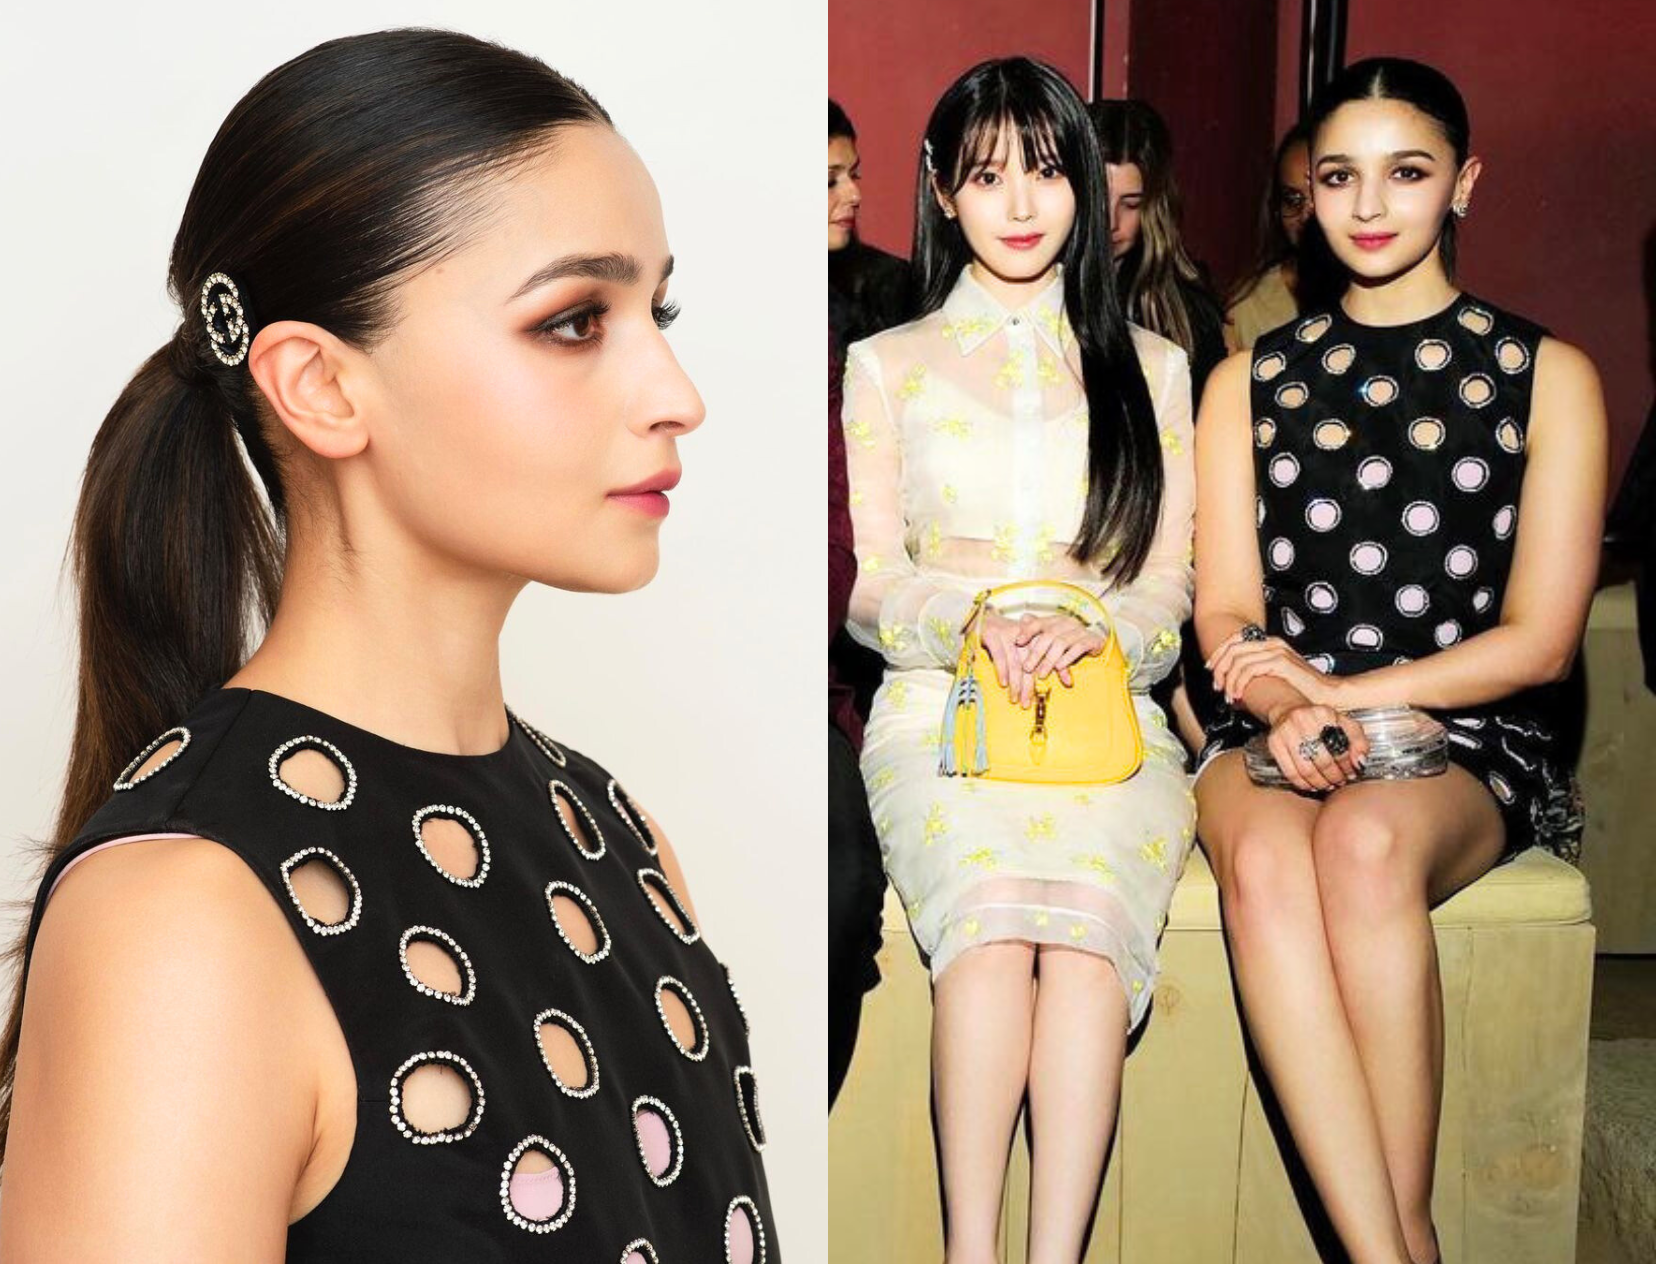 Alia Bhatt Gets Trolled For Photoshopping Her Pictures From The Gucci Event!